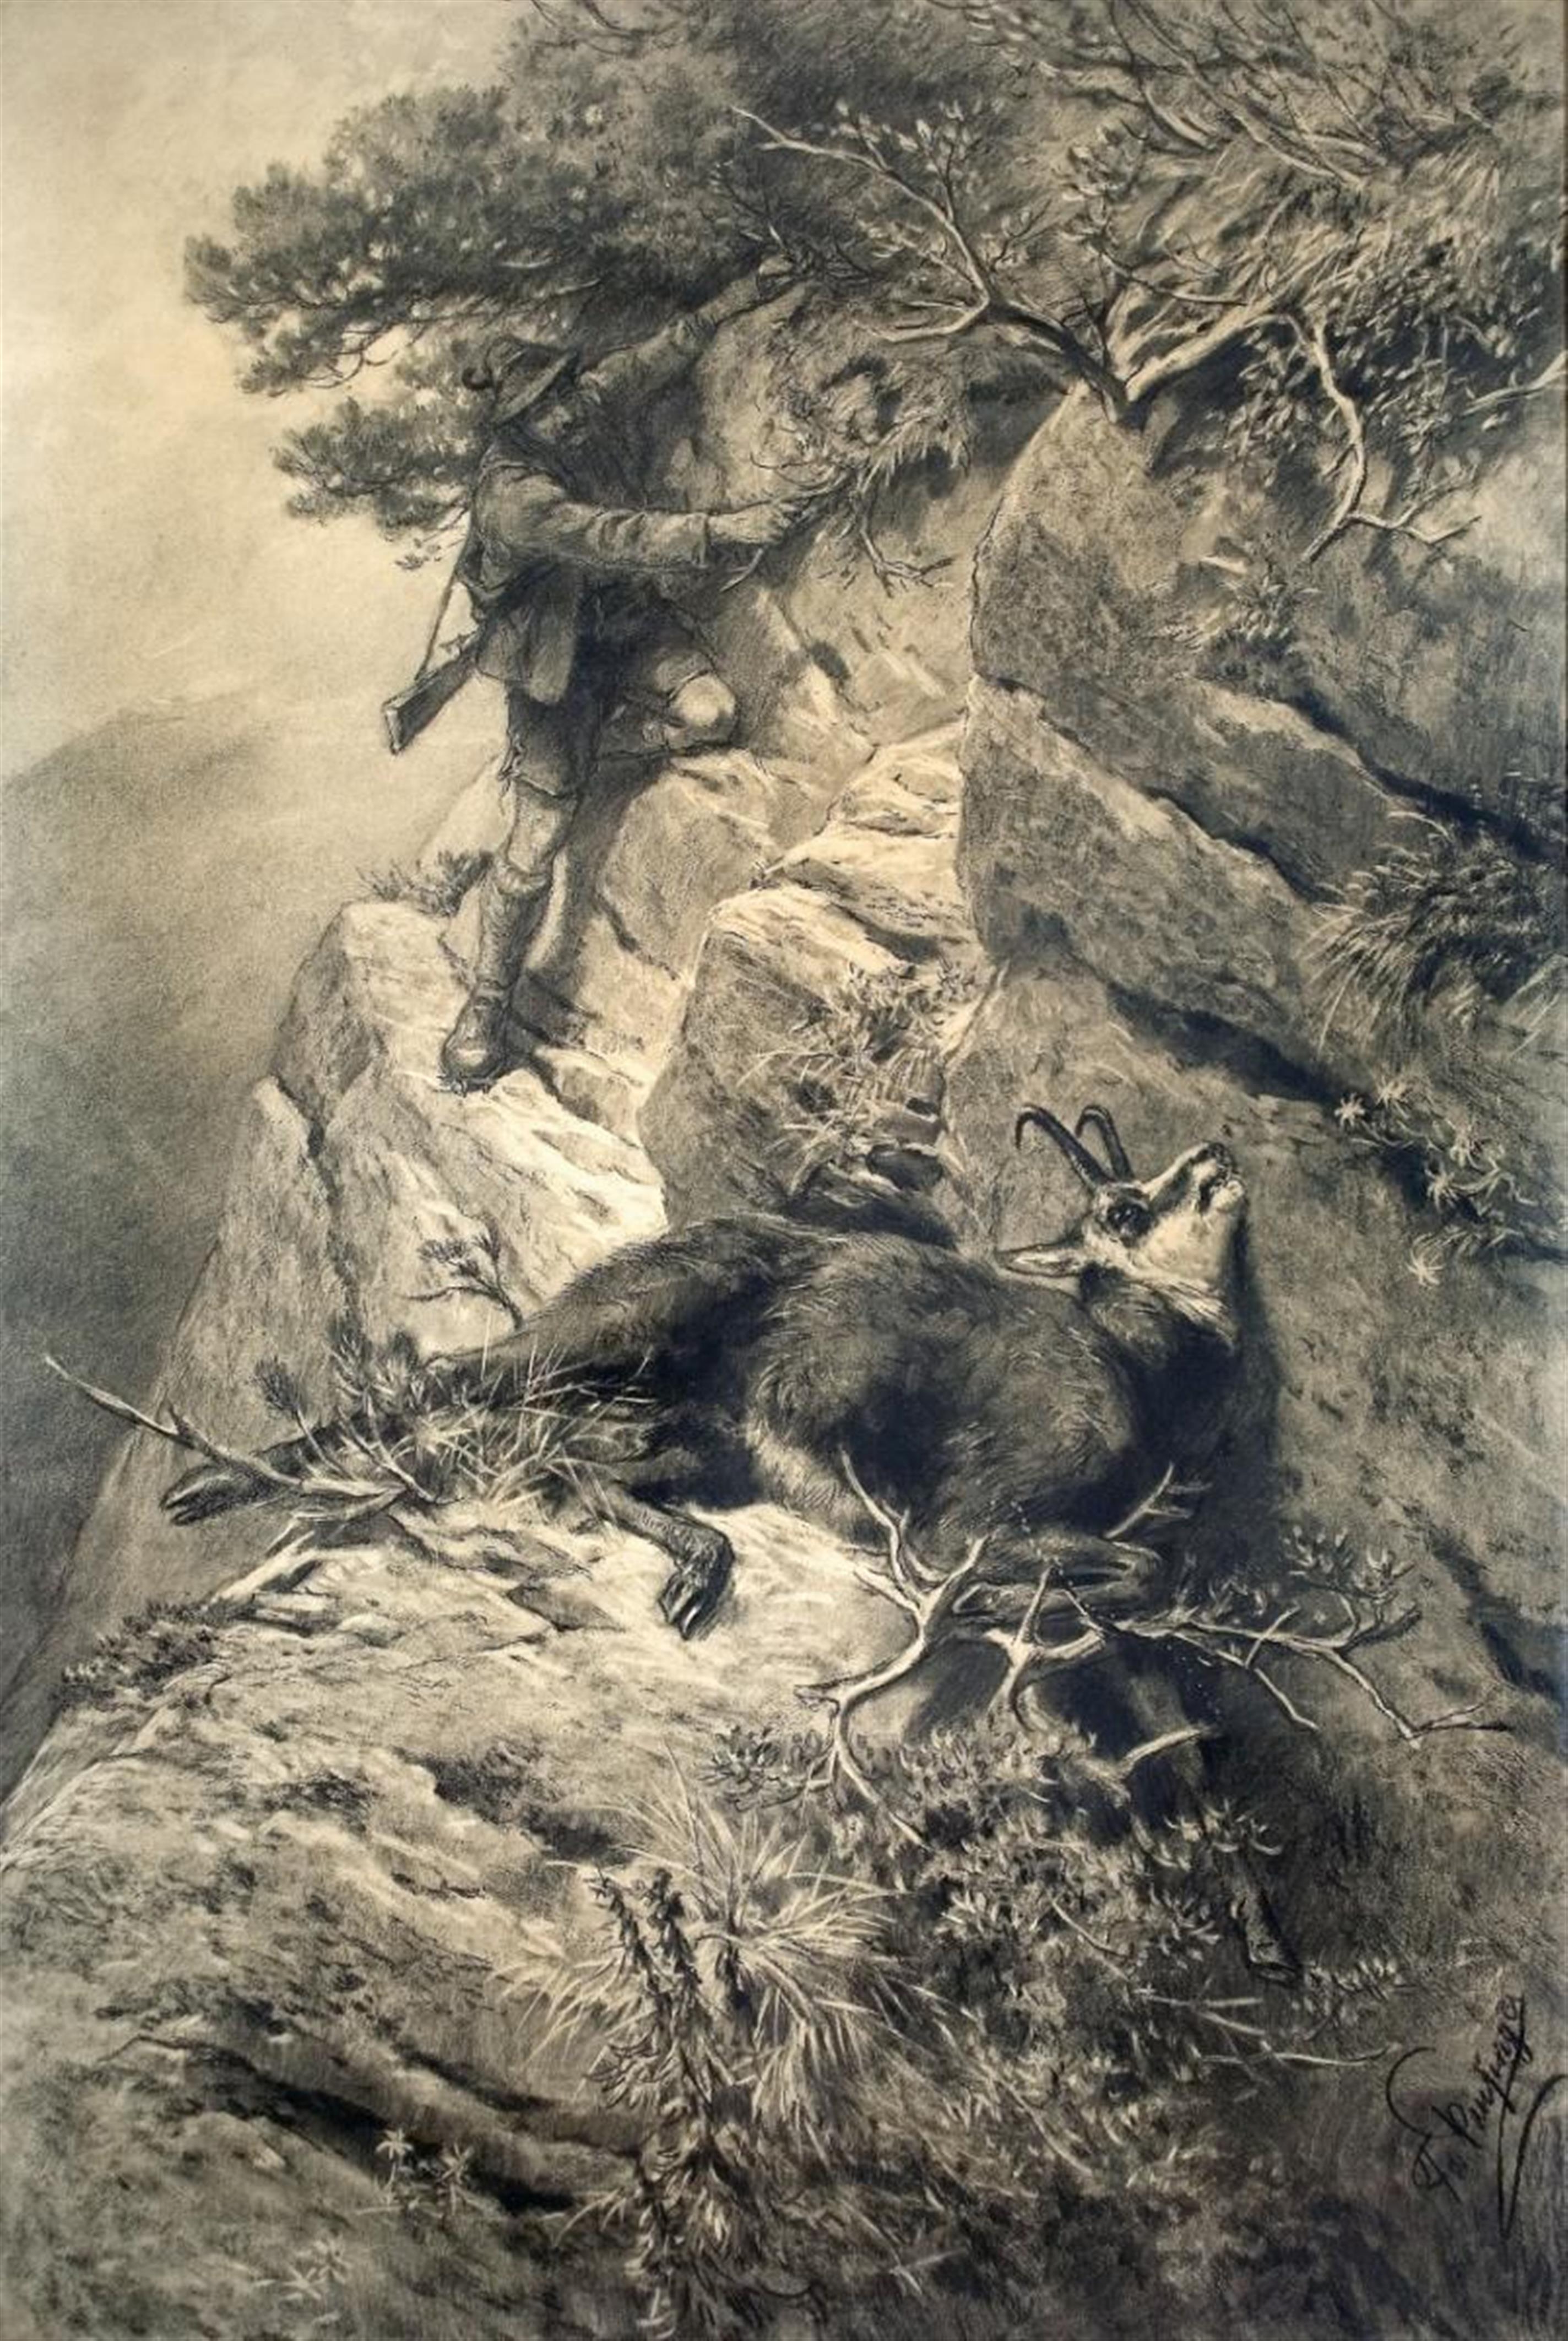 Franz Xaver von Pausinger - HUNTER WITH CHAMOIS BUCH IN THE MOUNTAINS - image-1